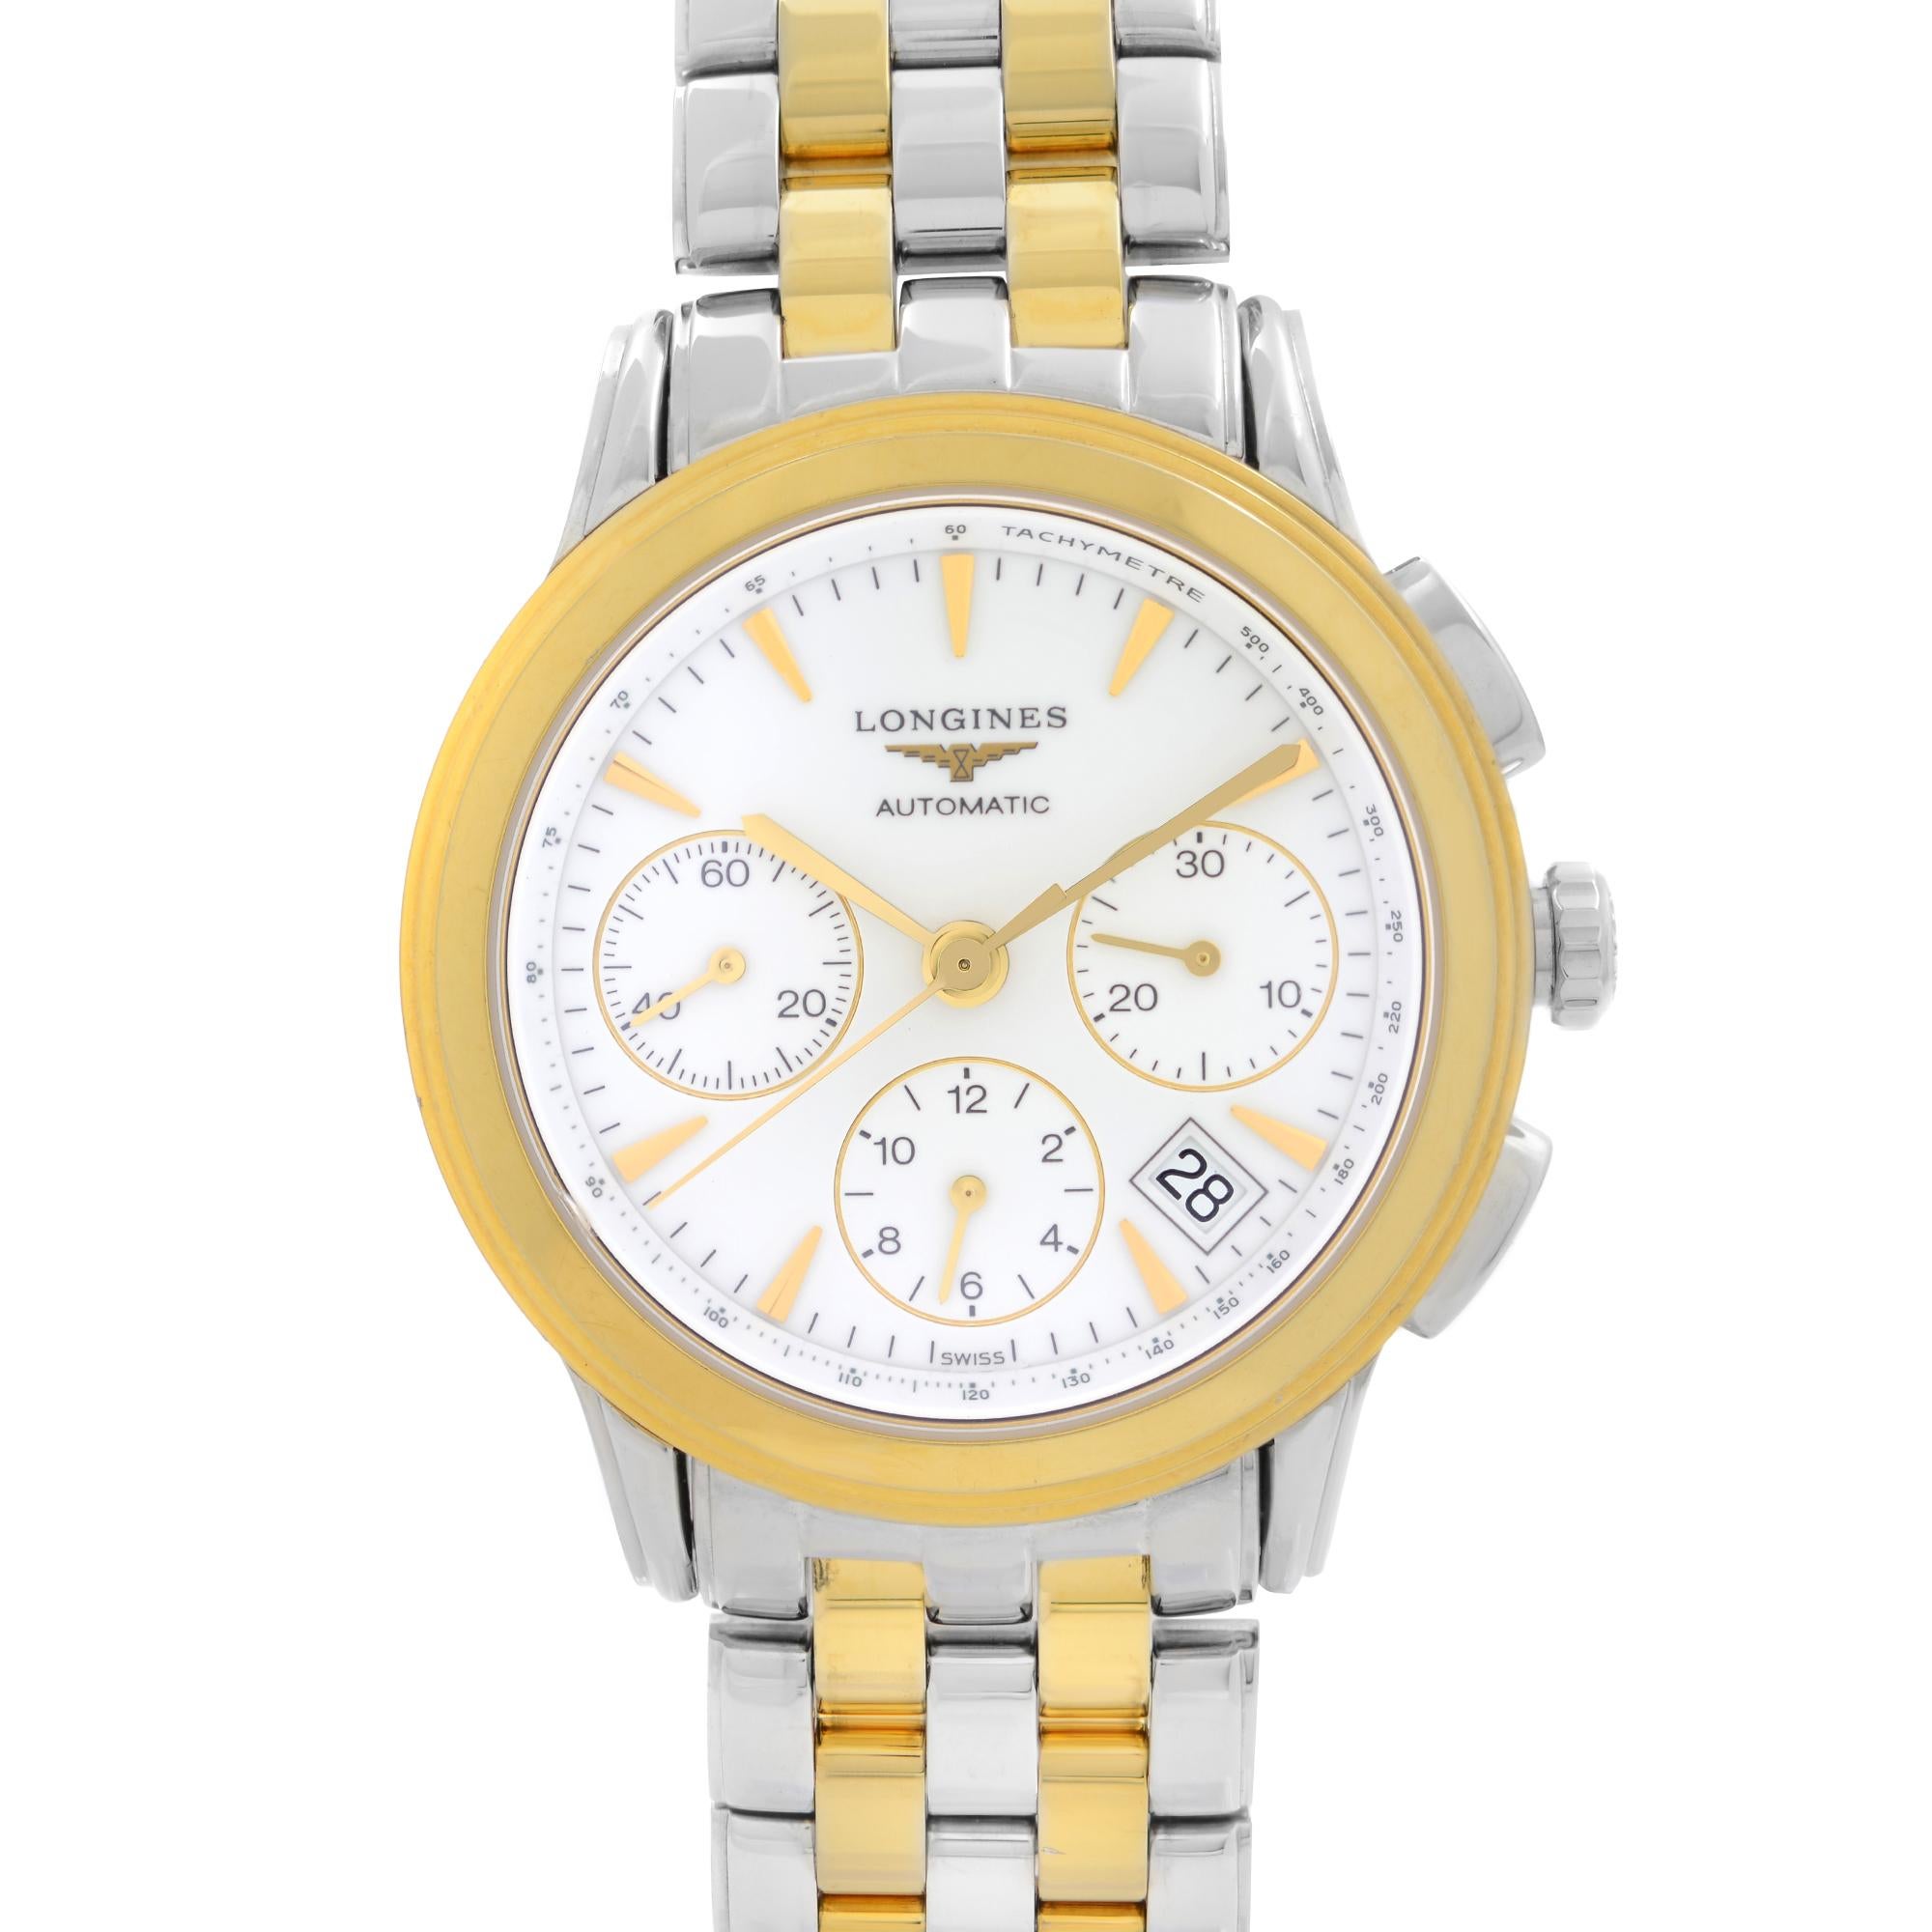 Pre-owned Longines Flagship Chronograph Two-Tone Stainless Steel White Dial Automatic Men's Watch L4.803.3.22.7. The Watch Has a Few Insignificant Dents and Tiny Scratches on the Bezel and Hairline Scratches on the Bracelet. No Original Box and